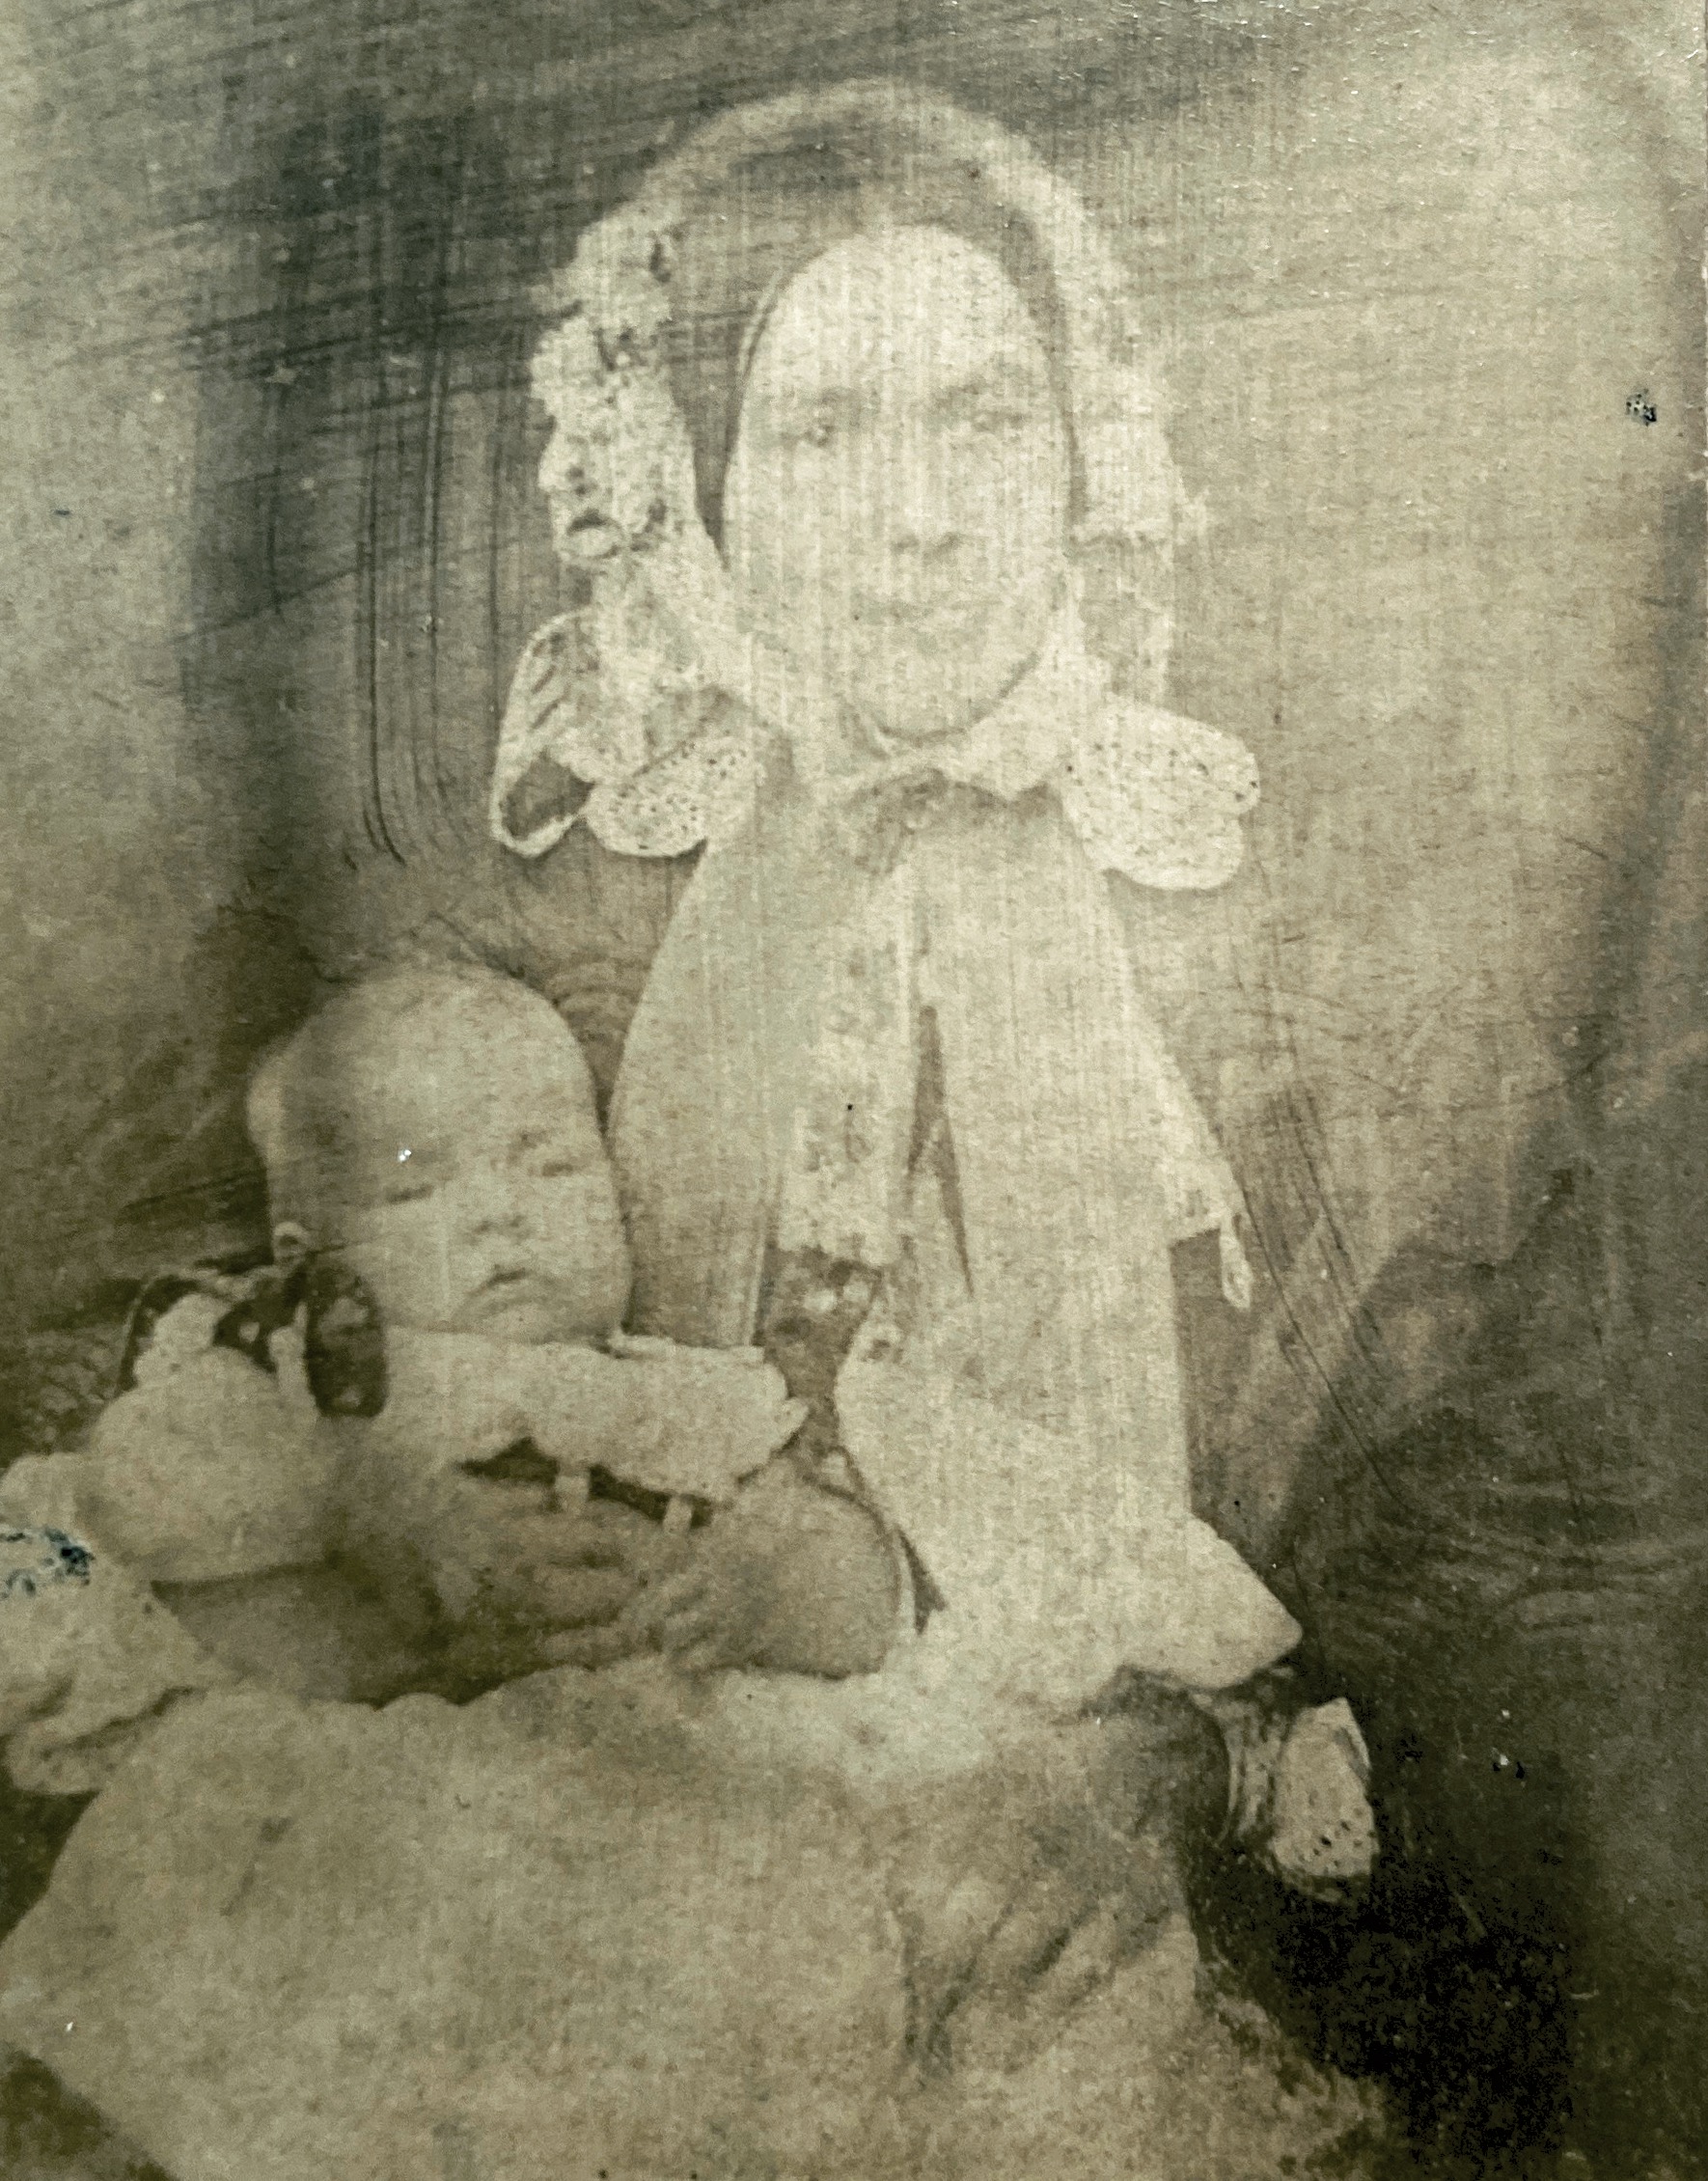 Archie Clayton as a baby in 1904.